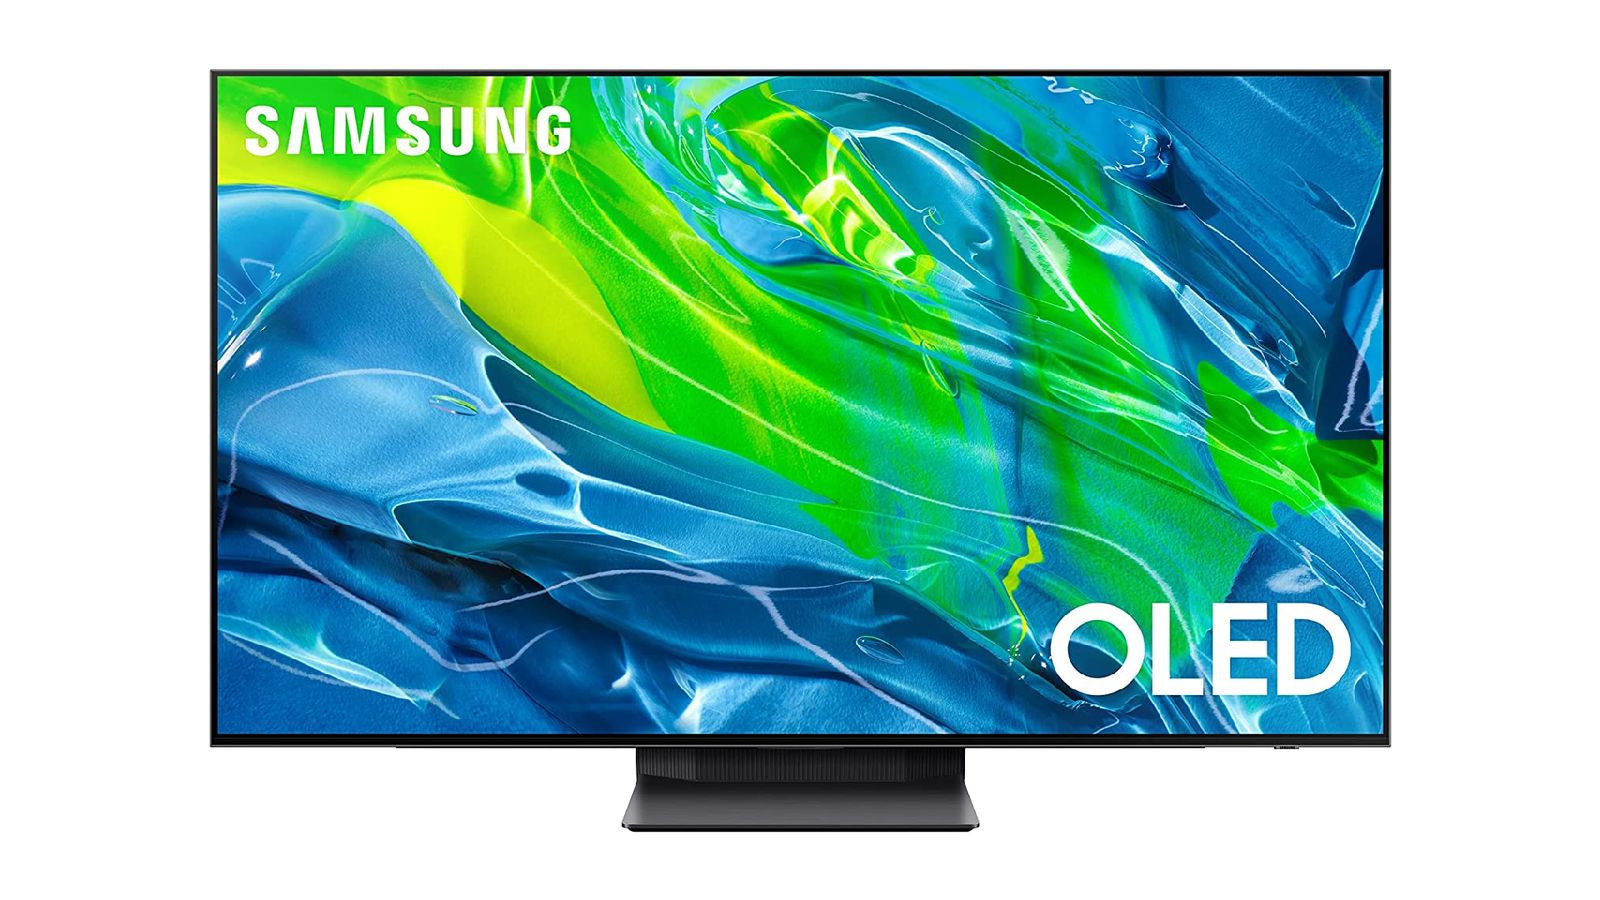 Best TV - Samsung S95B dark grey-framed TV with a green and blue pattern on the display.